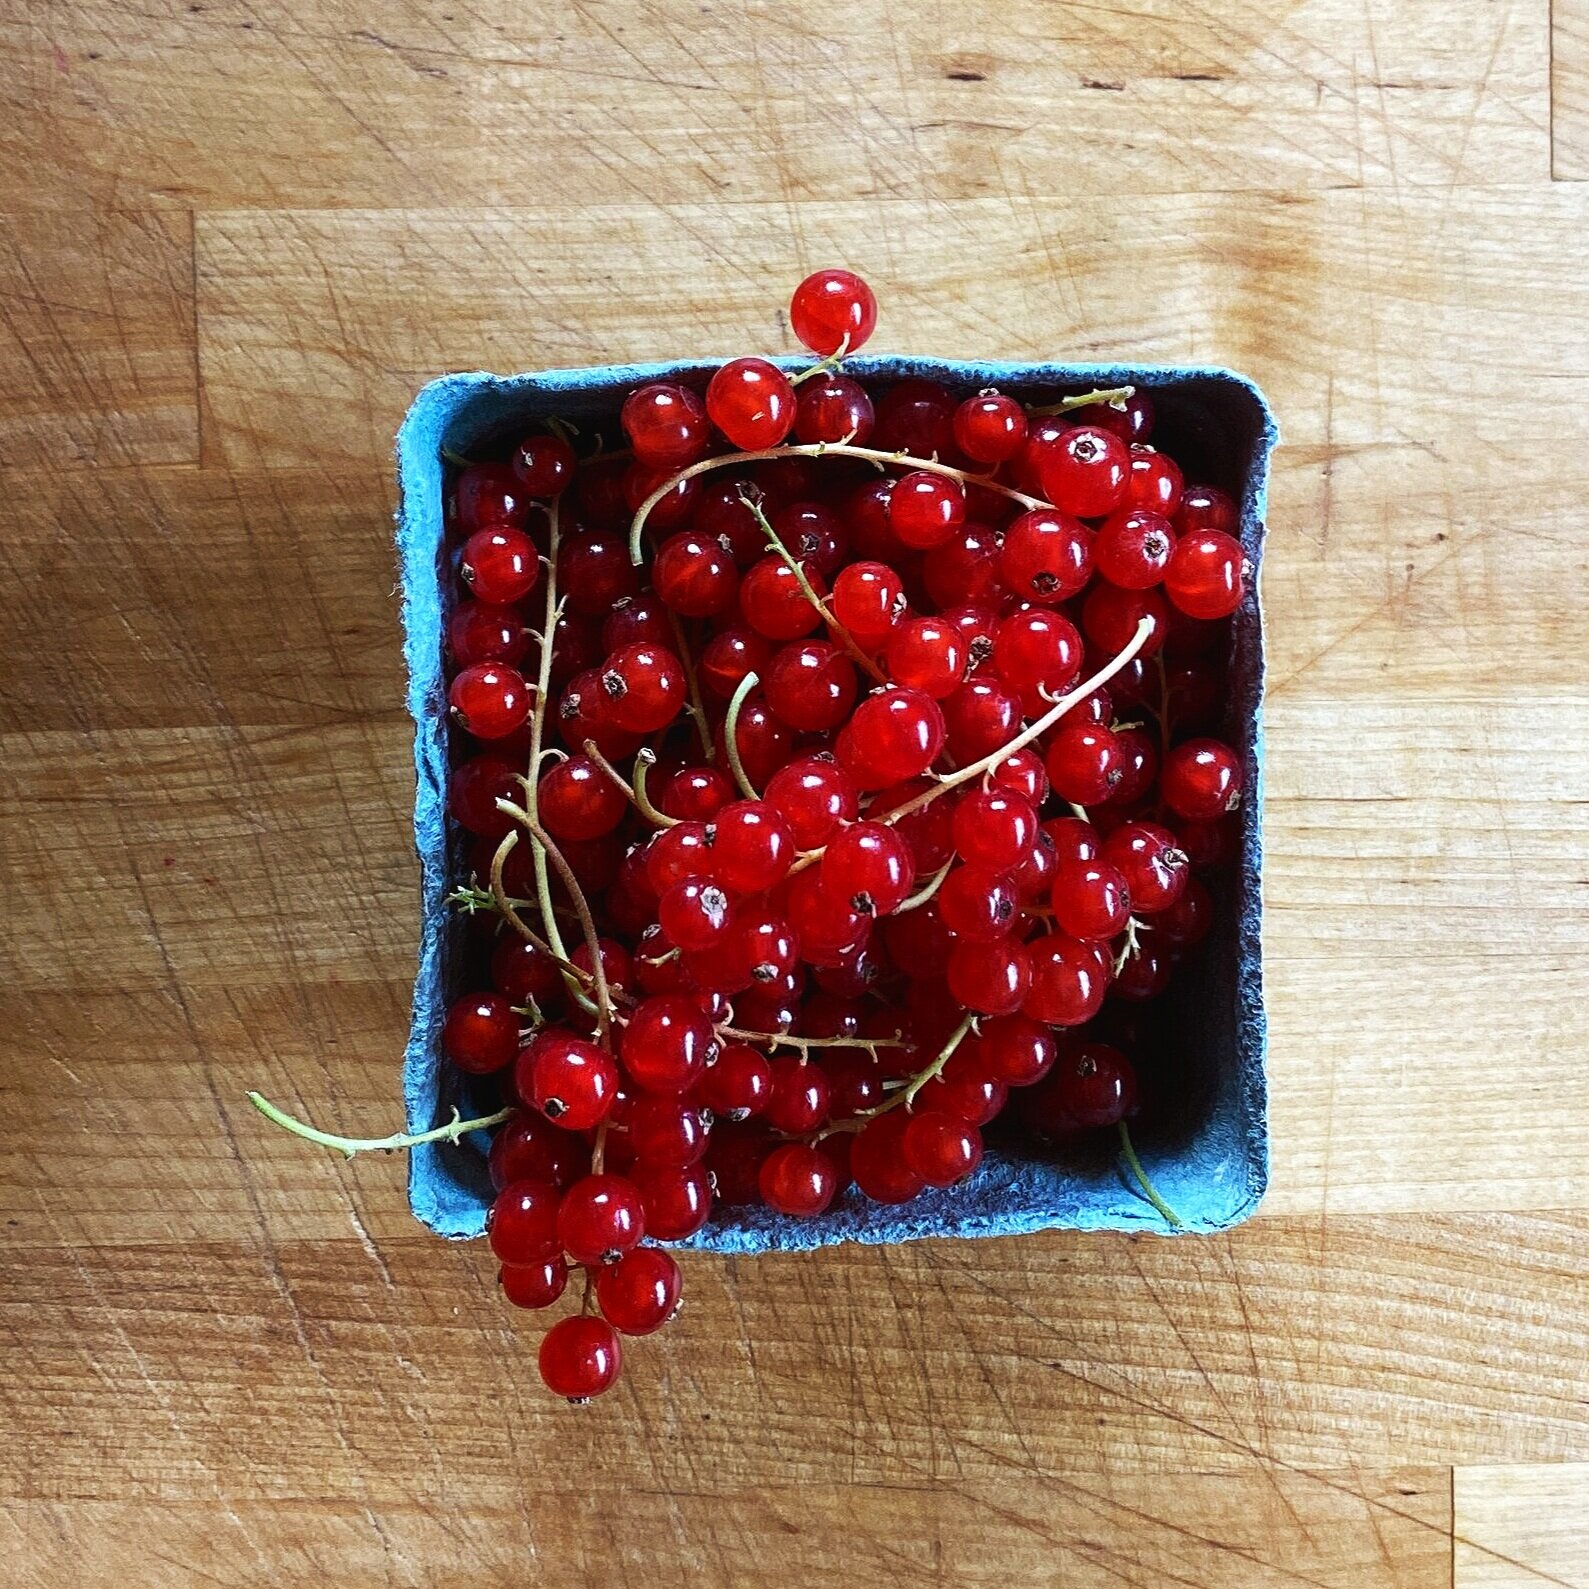 Freshly picked red currants